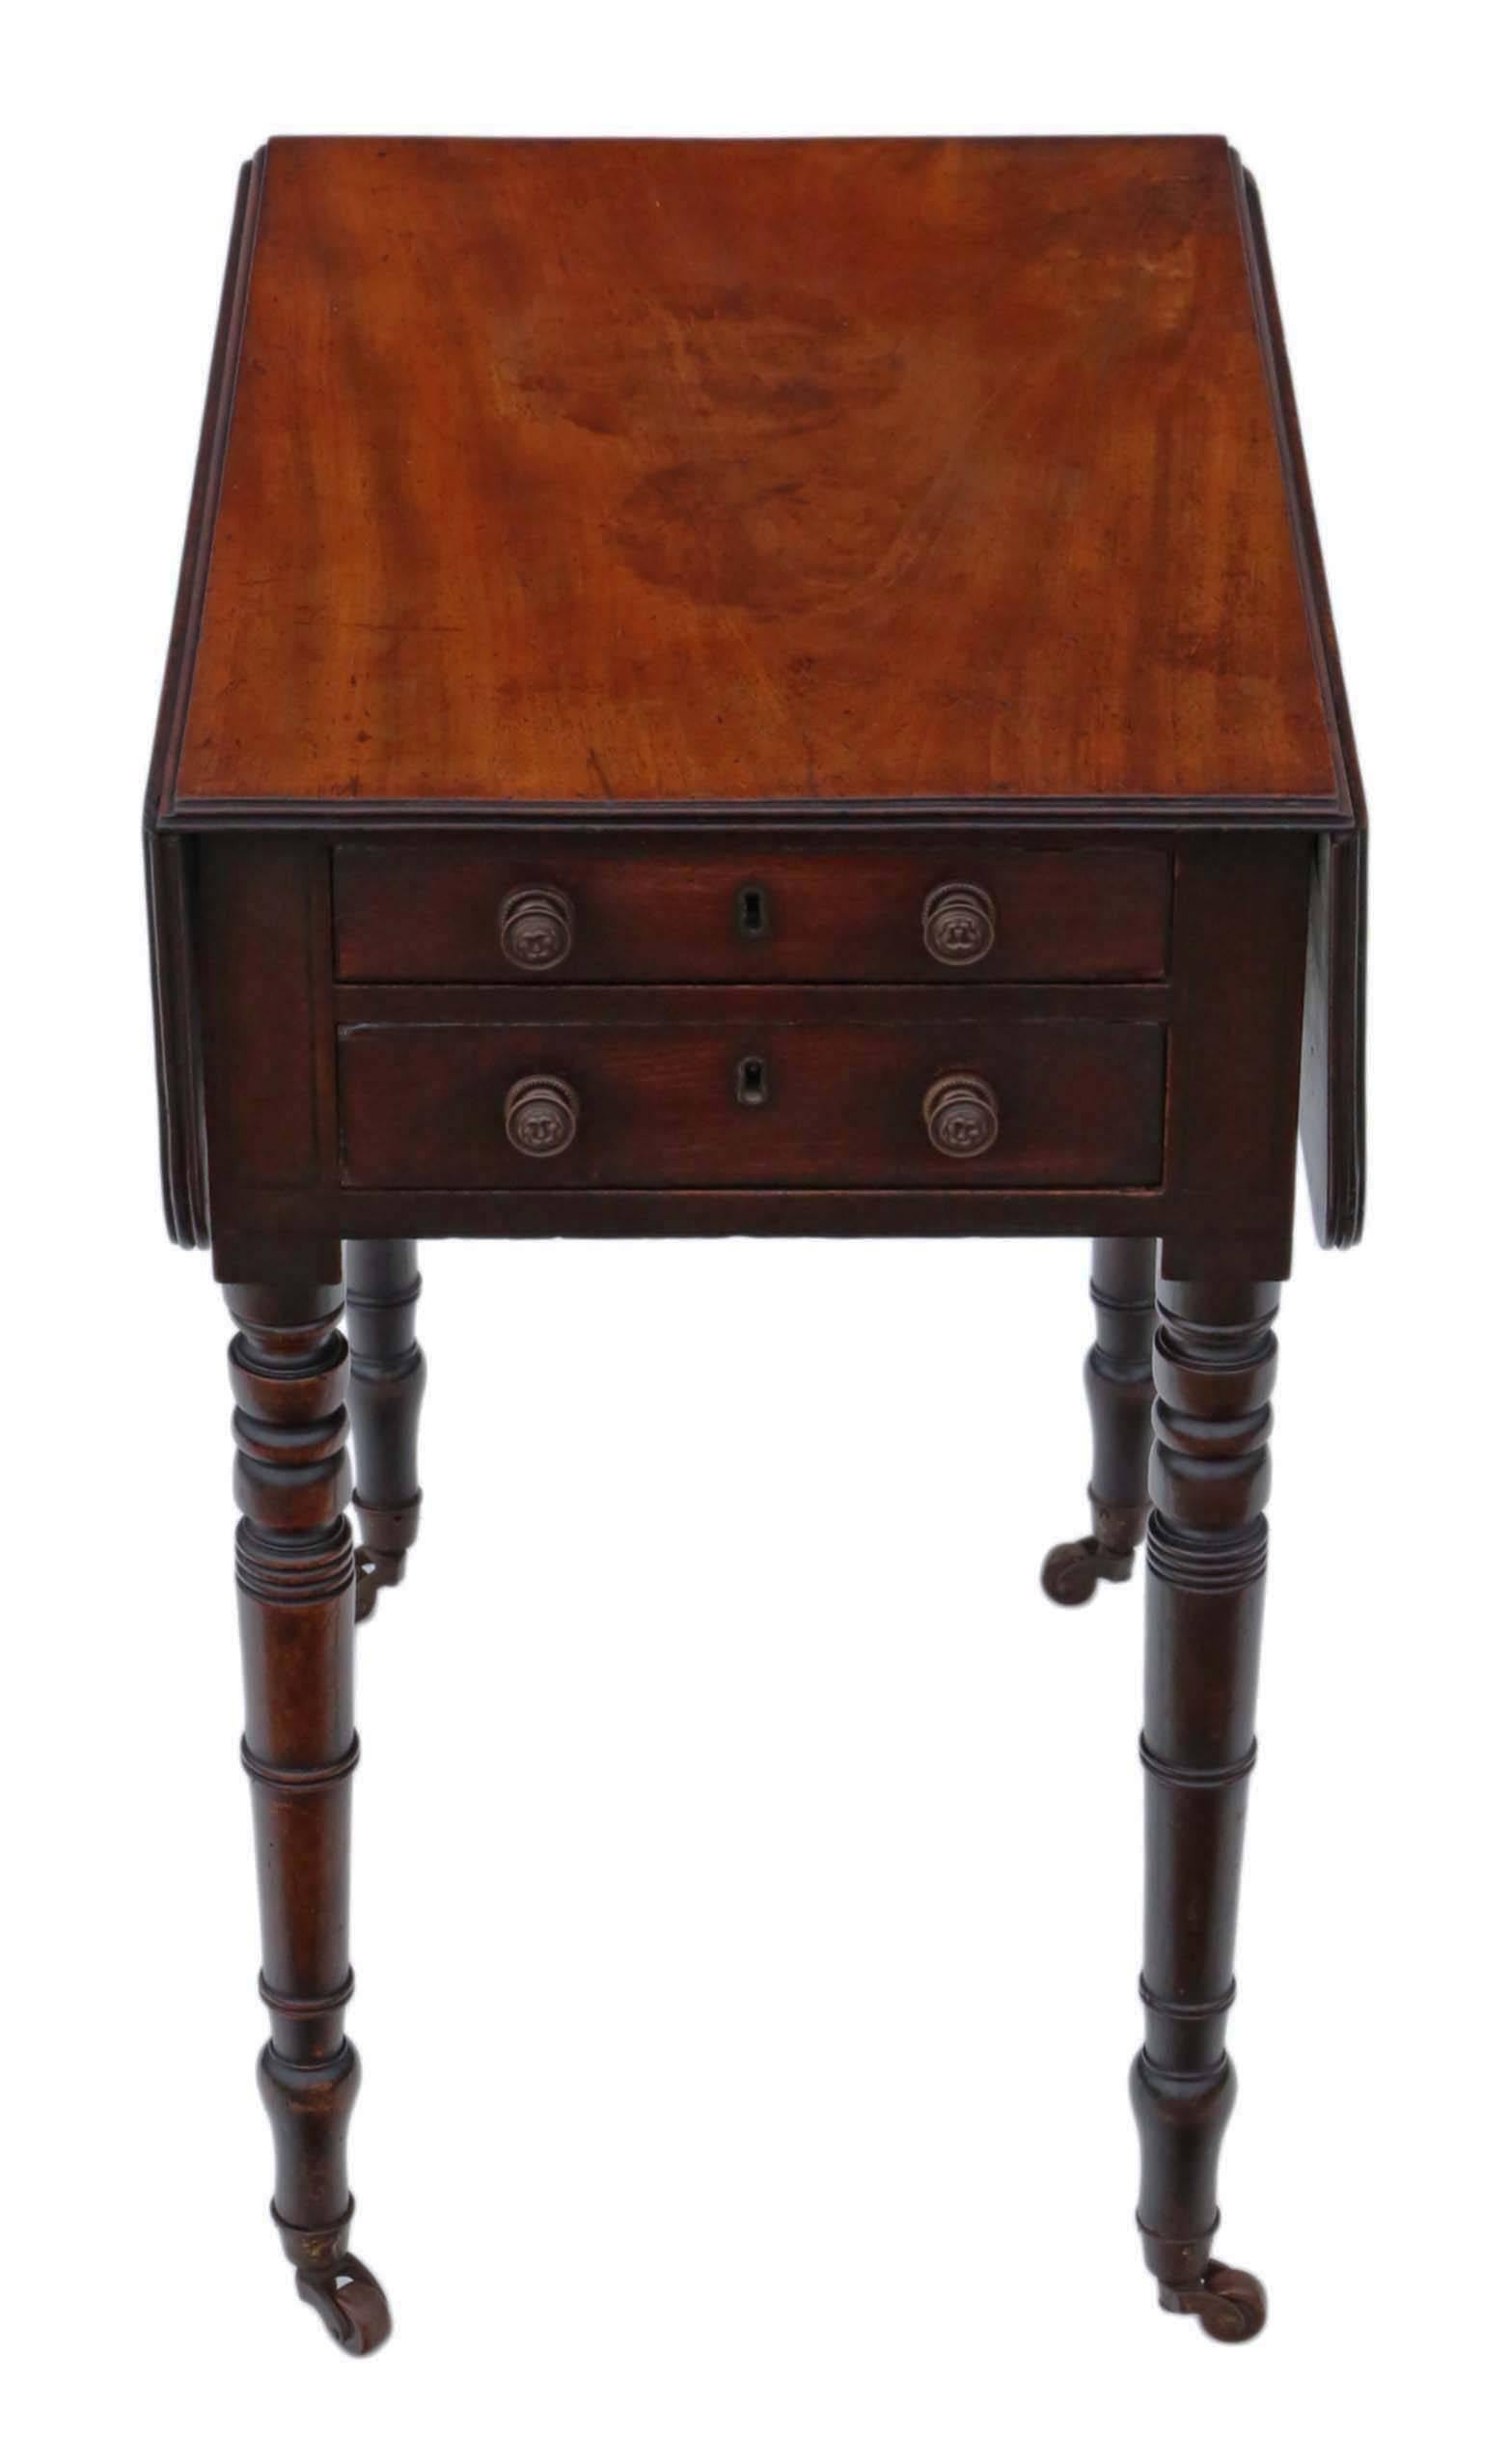 Antique quality Regency circa 1825 mahogany two-drawer drop-leaf work table. Two mahogany lined drawers to one side, which slide freely (dummies to the other).

Solid and strong, with no loose joints. Full of age, character and charm. Attractive